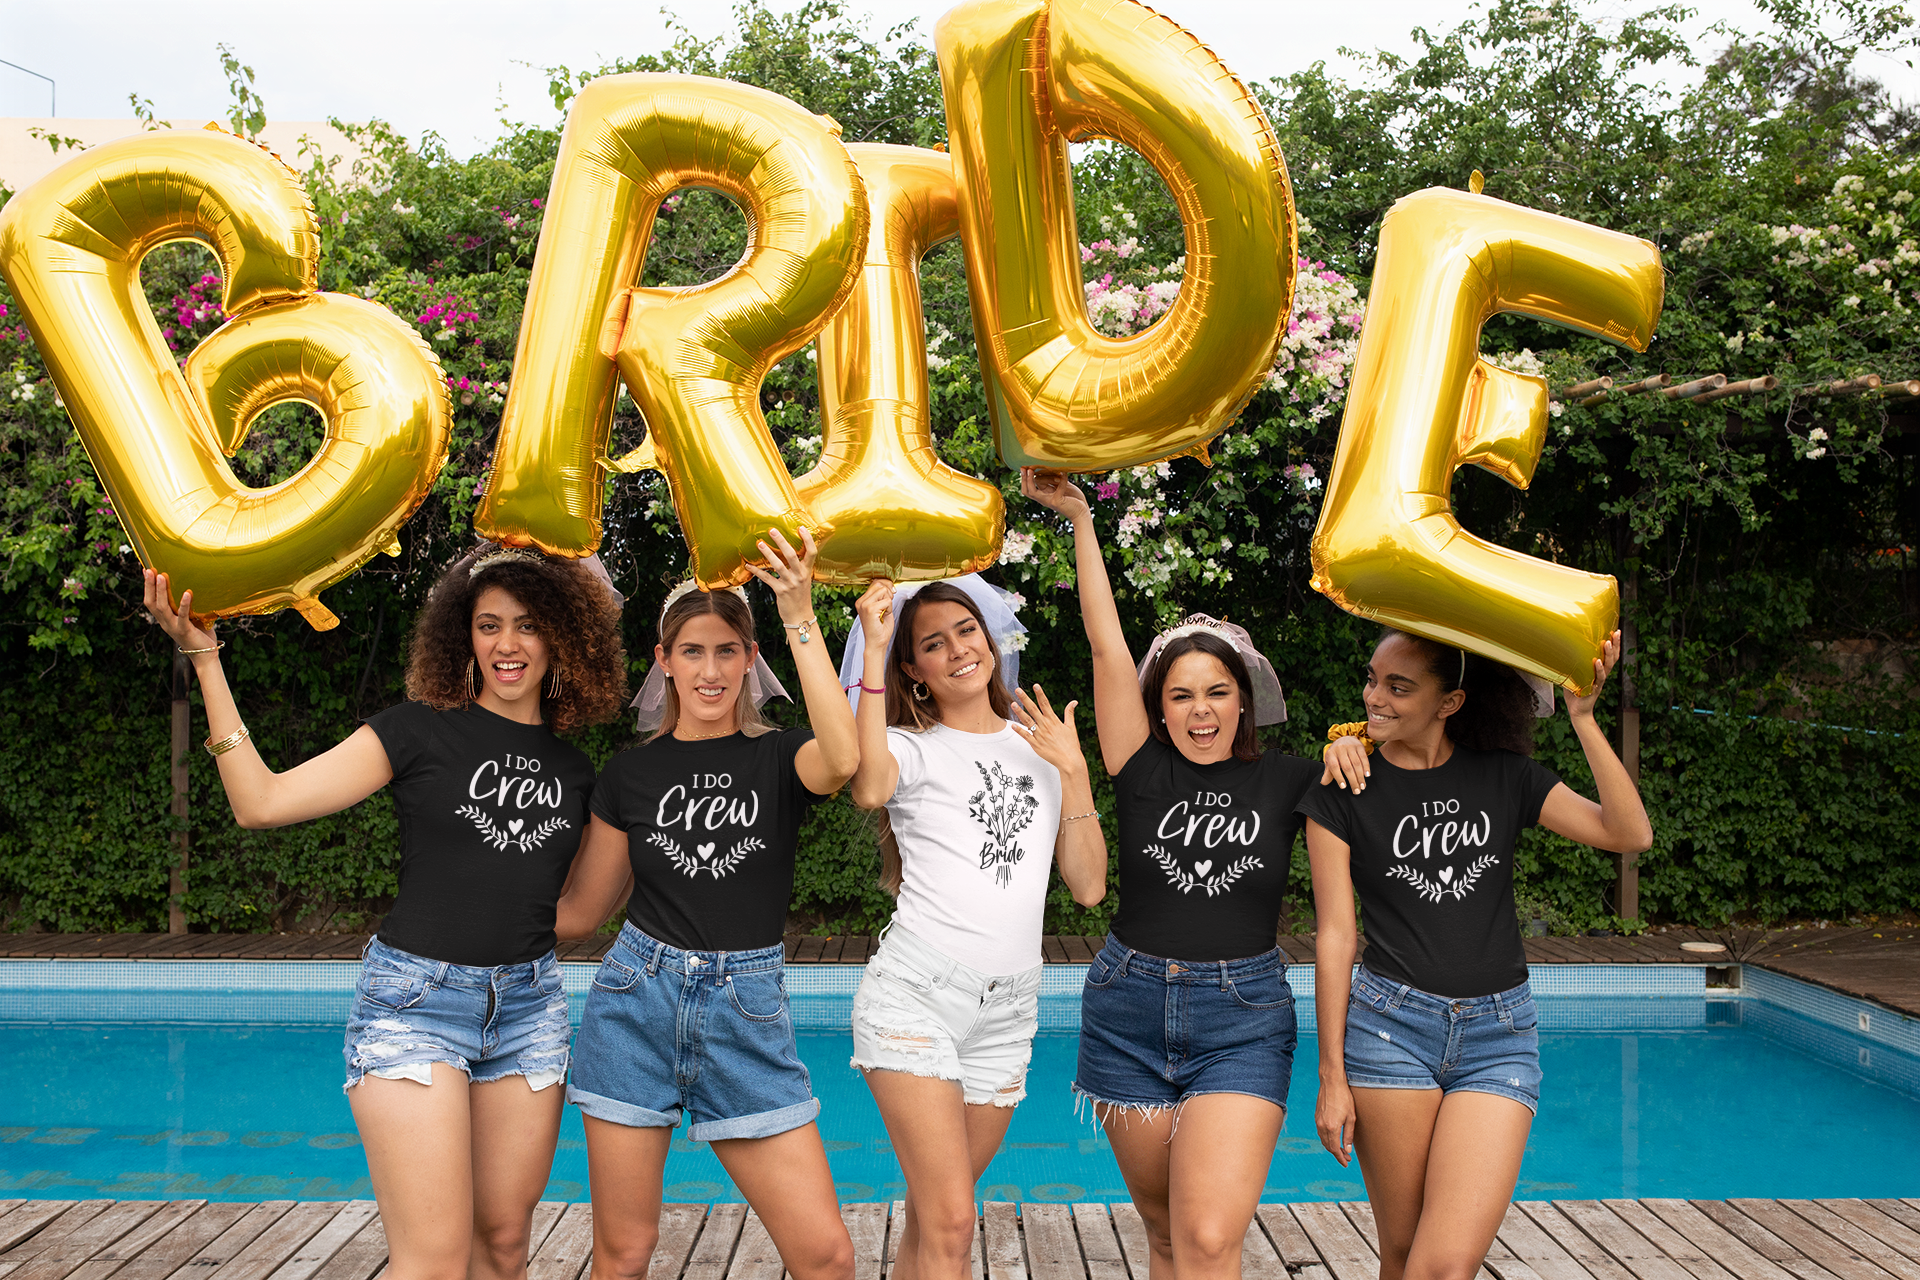 Bride's Brew Crew Shirts | Brews Before the I Do's Shirts | Bachelorette  Party | Bridal Party | Brewery Bachelorette | Beer Bachelorette